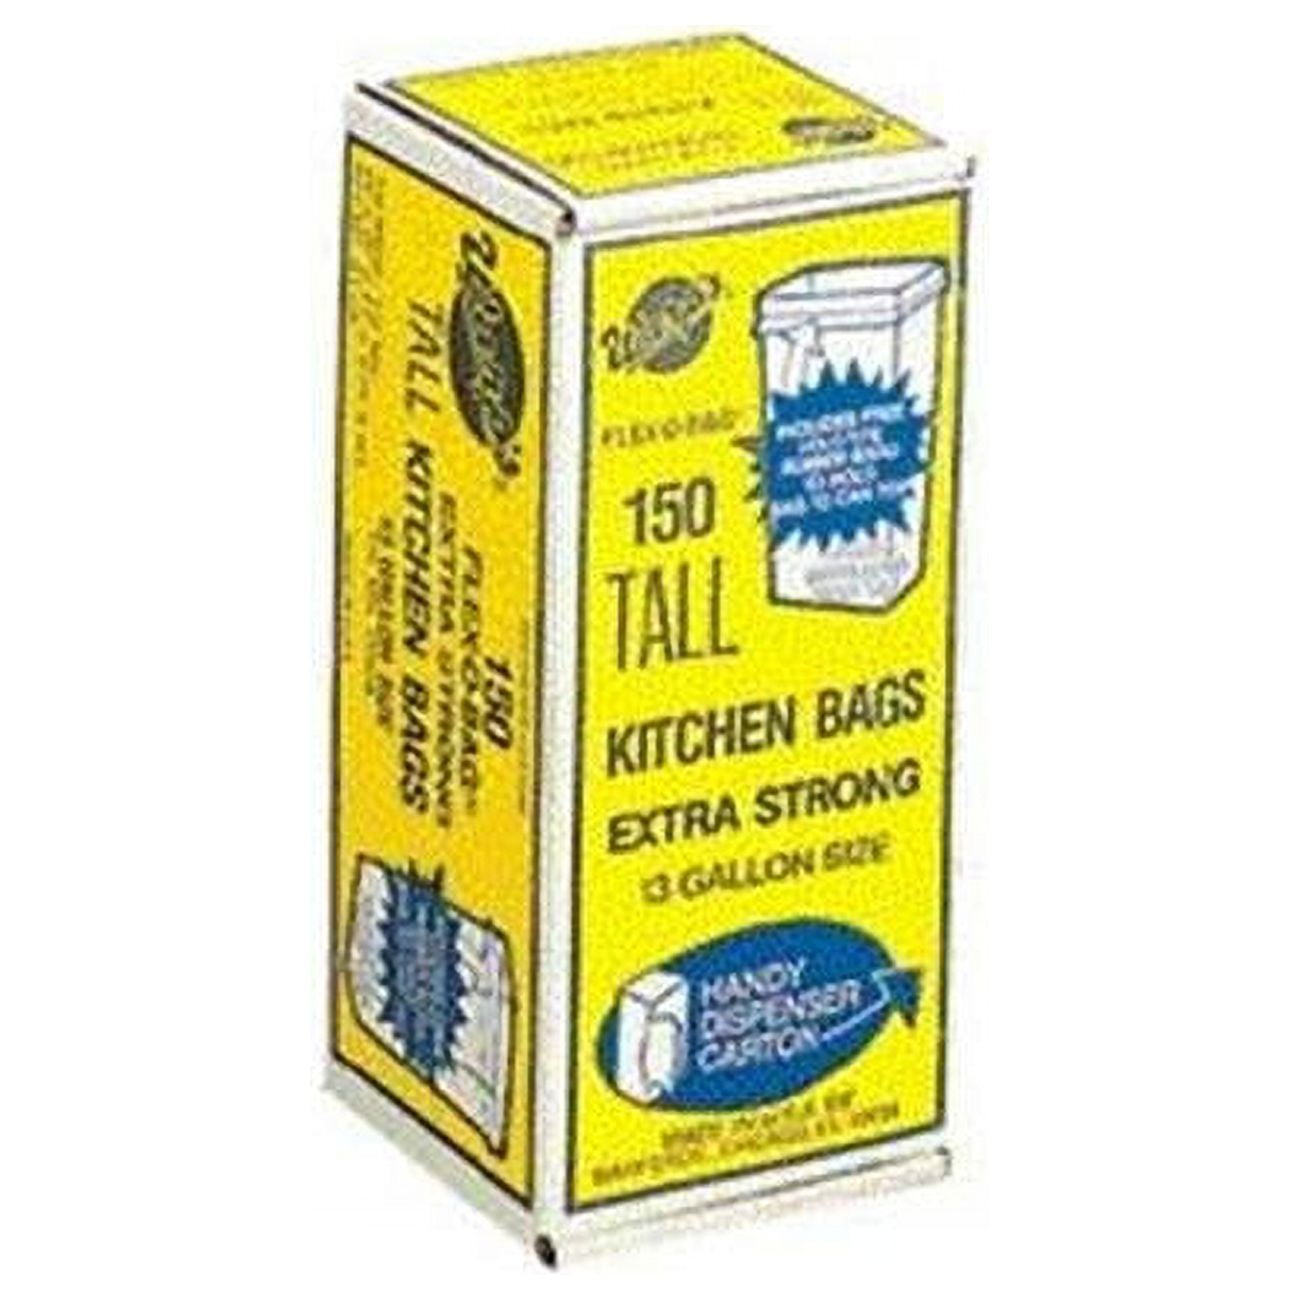 Recycled Tall Kitchen Bags, 13-16gal, .8mil, 24 x 33, White, 150 Bags/Box  (WBIRNW1K150V) - ELEVATE Marketplace